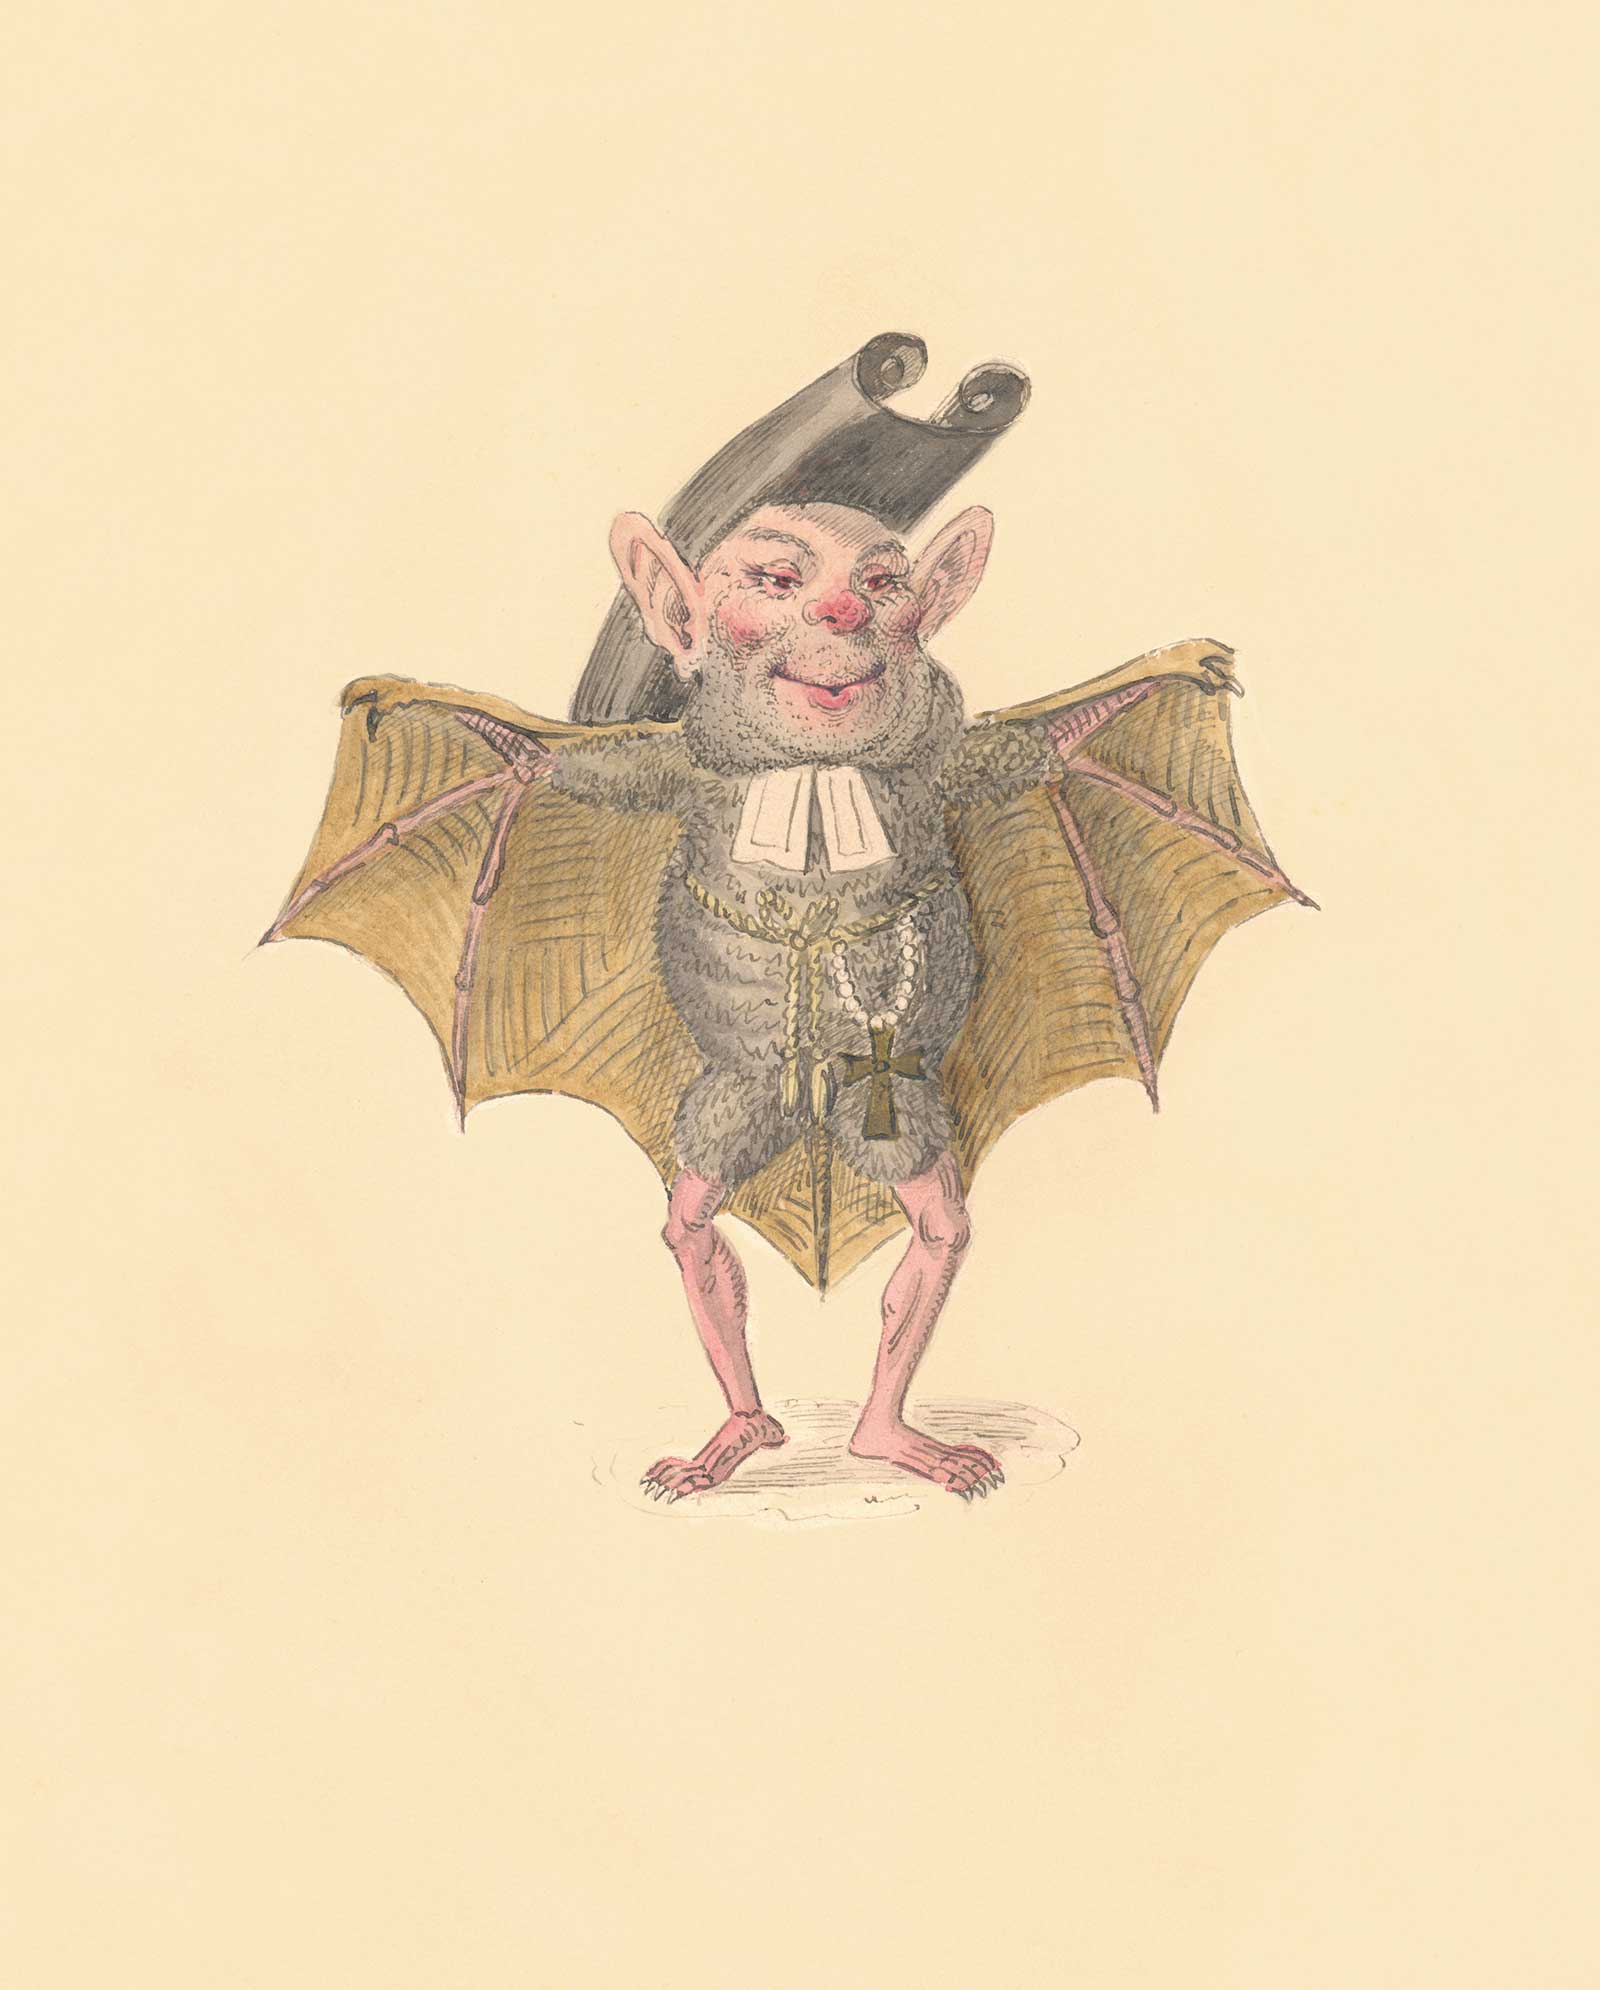 Charles Briton’s illustrated design of a bat costume, created for the Mistick Krewe of Comus for the eighteen seventy-three Mardi Gras parade in New Orleans. Organized in eighteen fifty-six, Comus was the first of the krewes, or secret societies, that marched in the annual parades held in the city during the days leading up to the beginning of Lenten abstinence. Briton’s costumes were created to illustrate the theme of the organization’s procession that year: “The Missing Links to Darwin’s Origin of Species.” Featuring fantastical representations of a wide range of fauna and flora, Briton’s designs for the conservative and predominantly Anglo-American Comus krewe were intended to mock both the new theories of evolution and the Reconstruction-era politicians of the day.